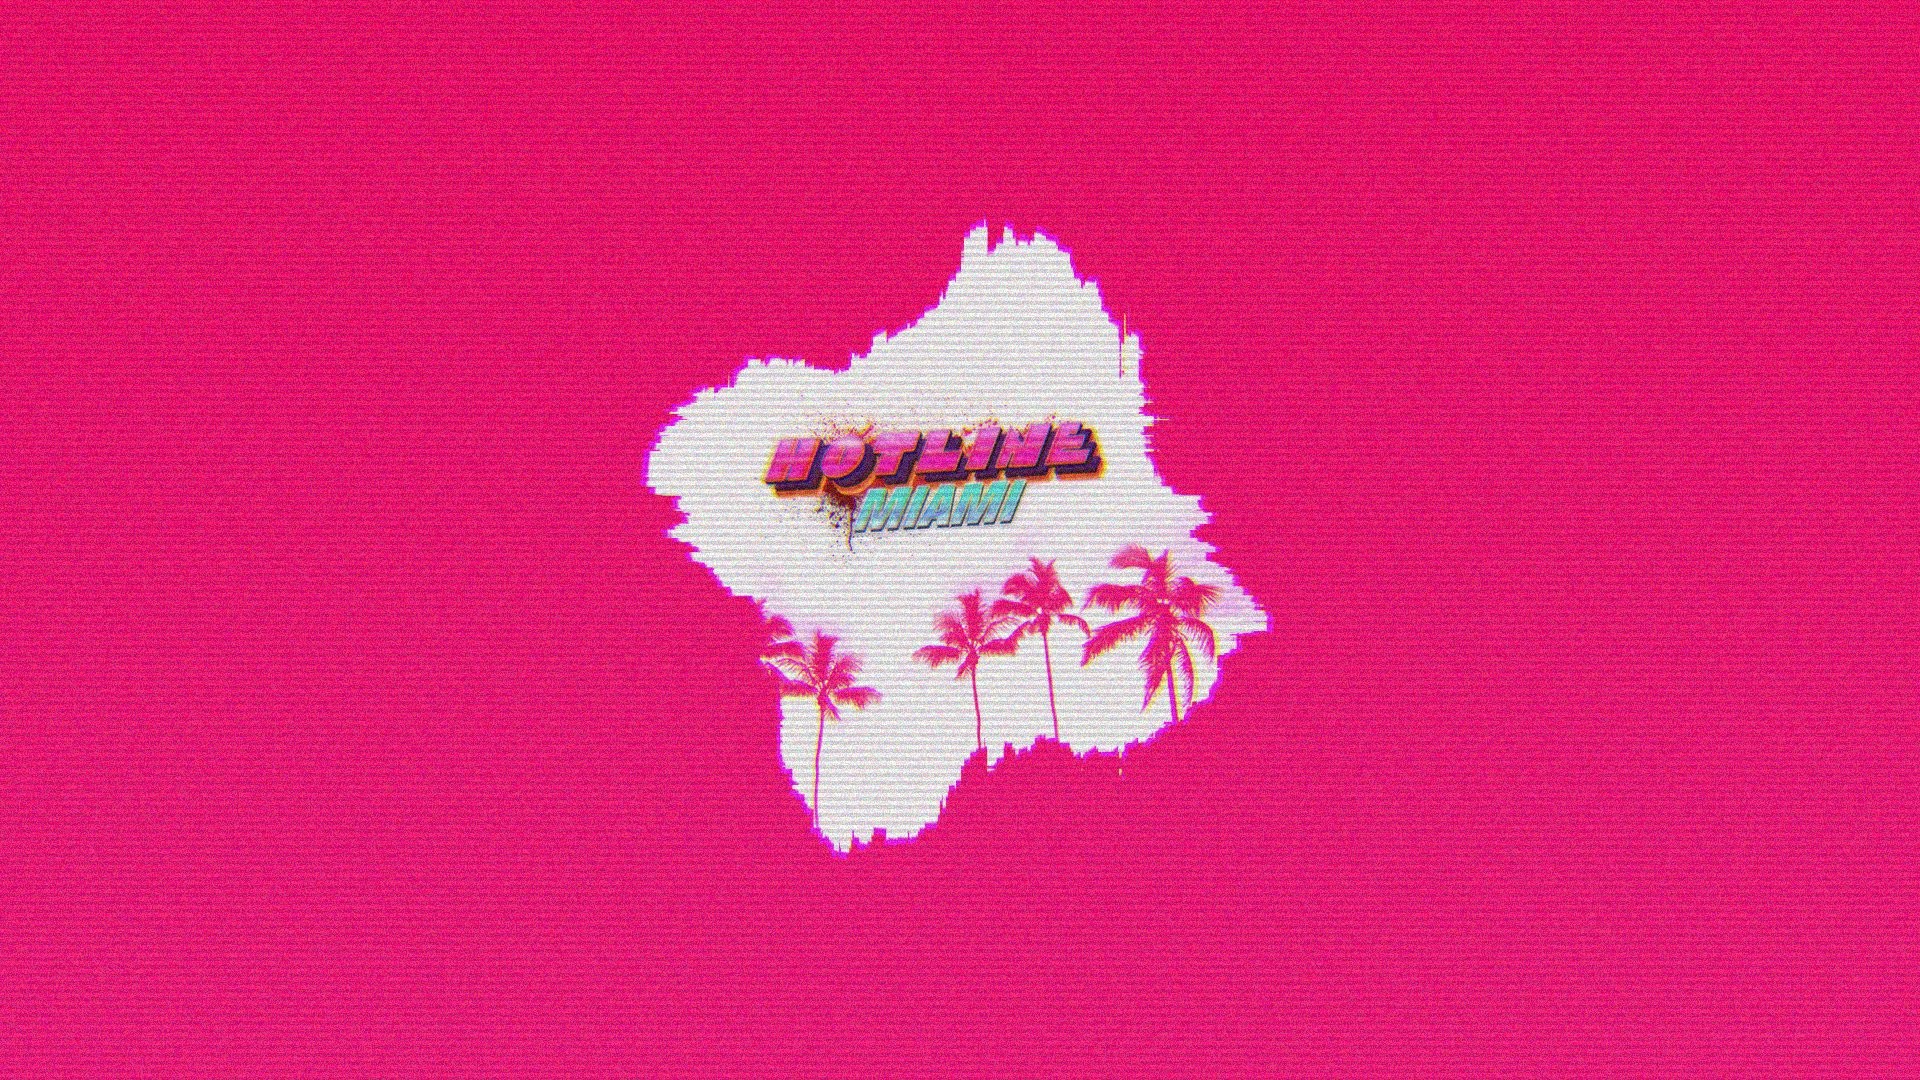 1920x1080 HOTLINE-MIAMI action shooter fighting hotline miami payday wallpaper. î¢¸.  